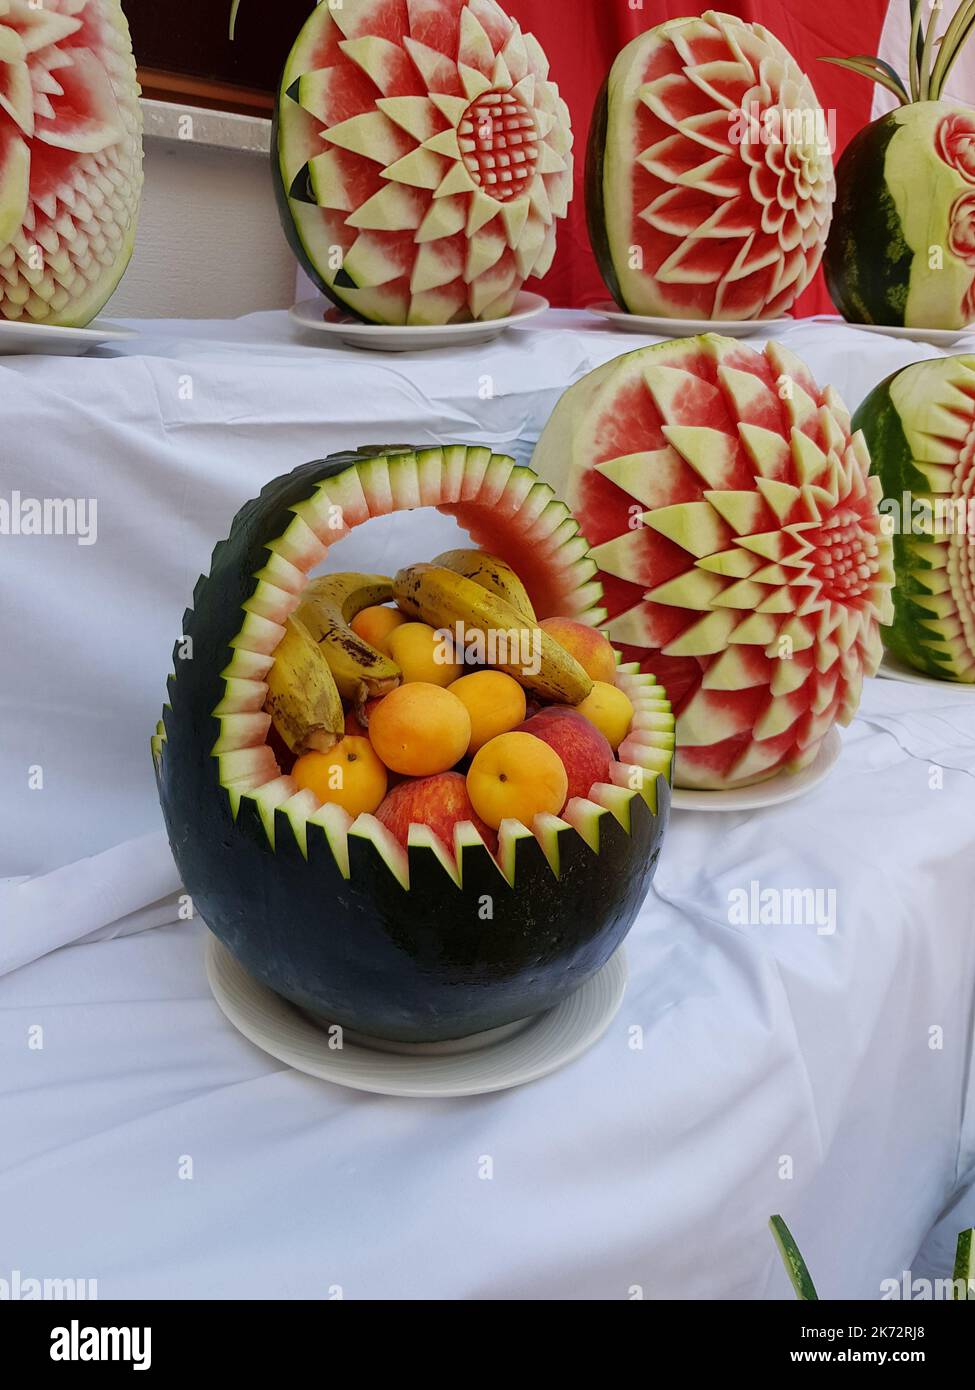 Large fresh watermelons with carved decorations on the counter. Decorative watermelon carving. Fruit cutting art Stock Photo